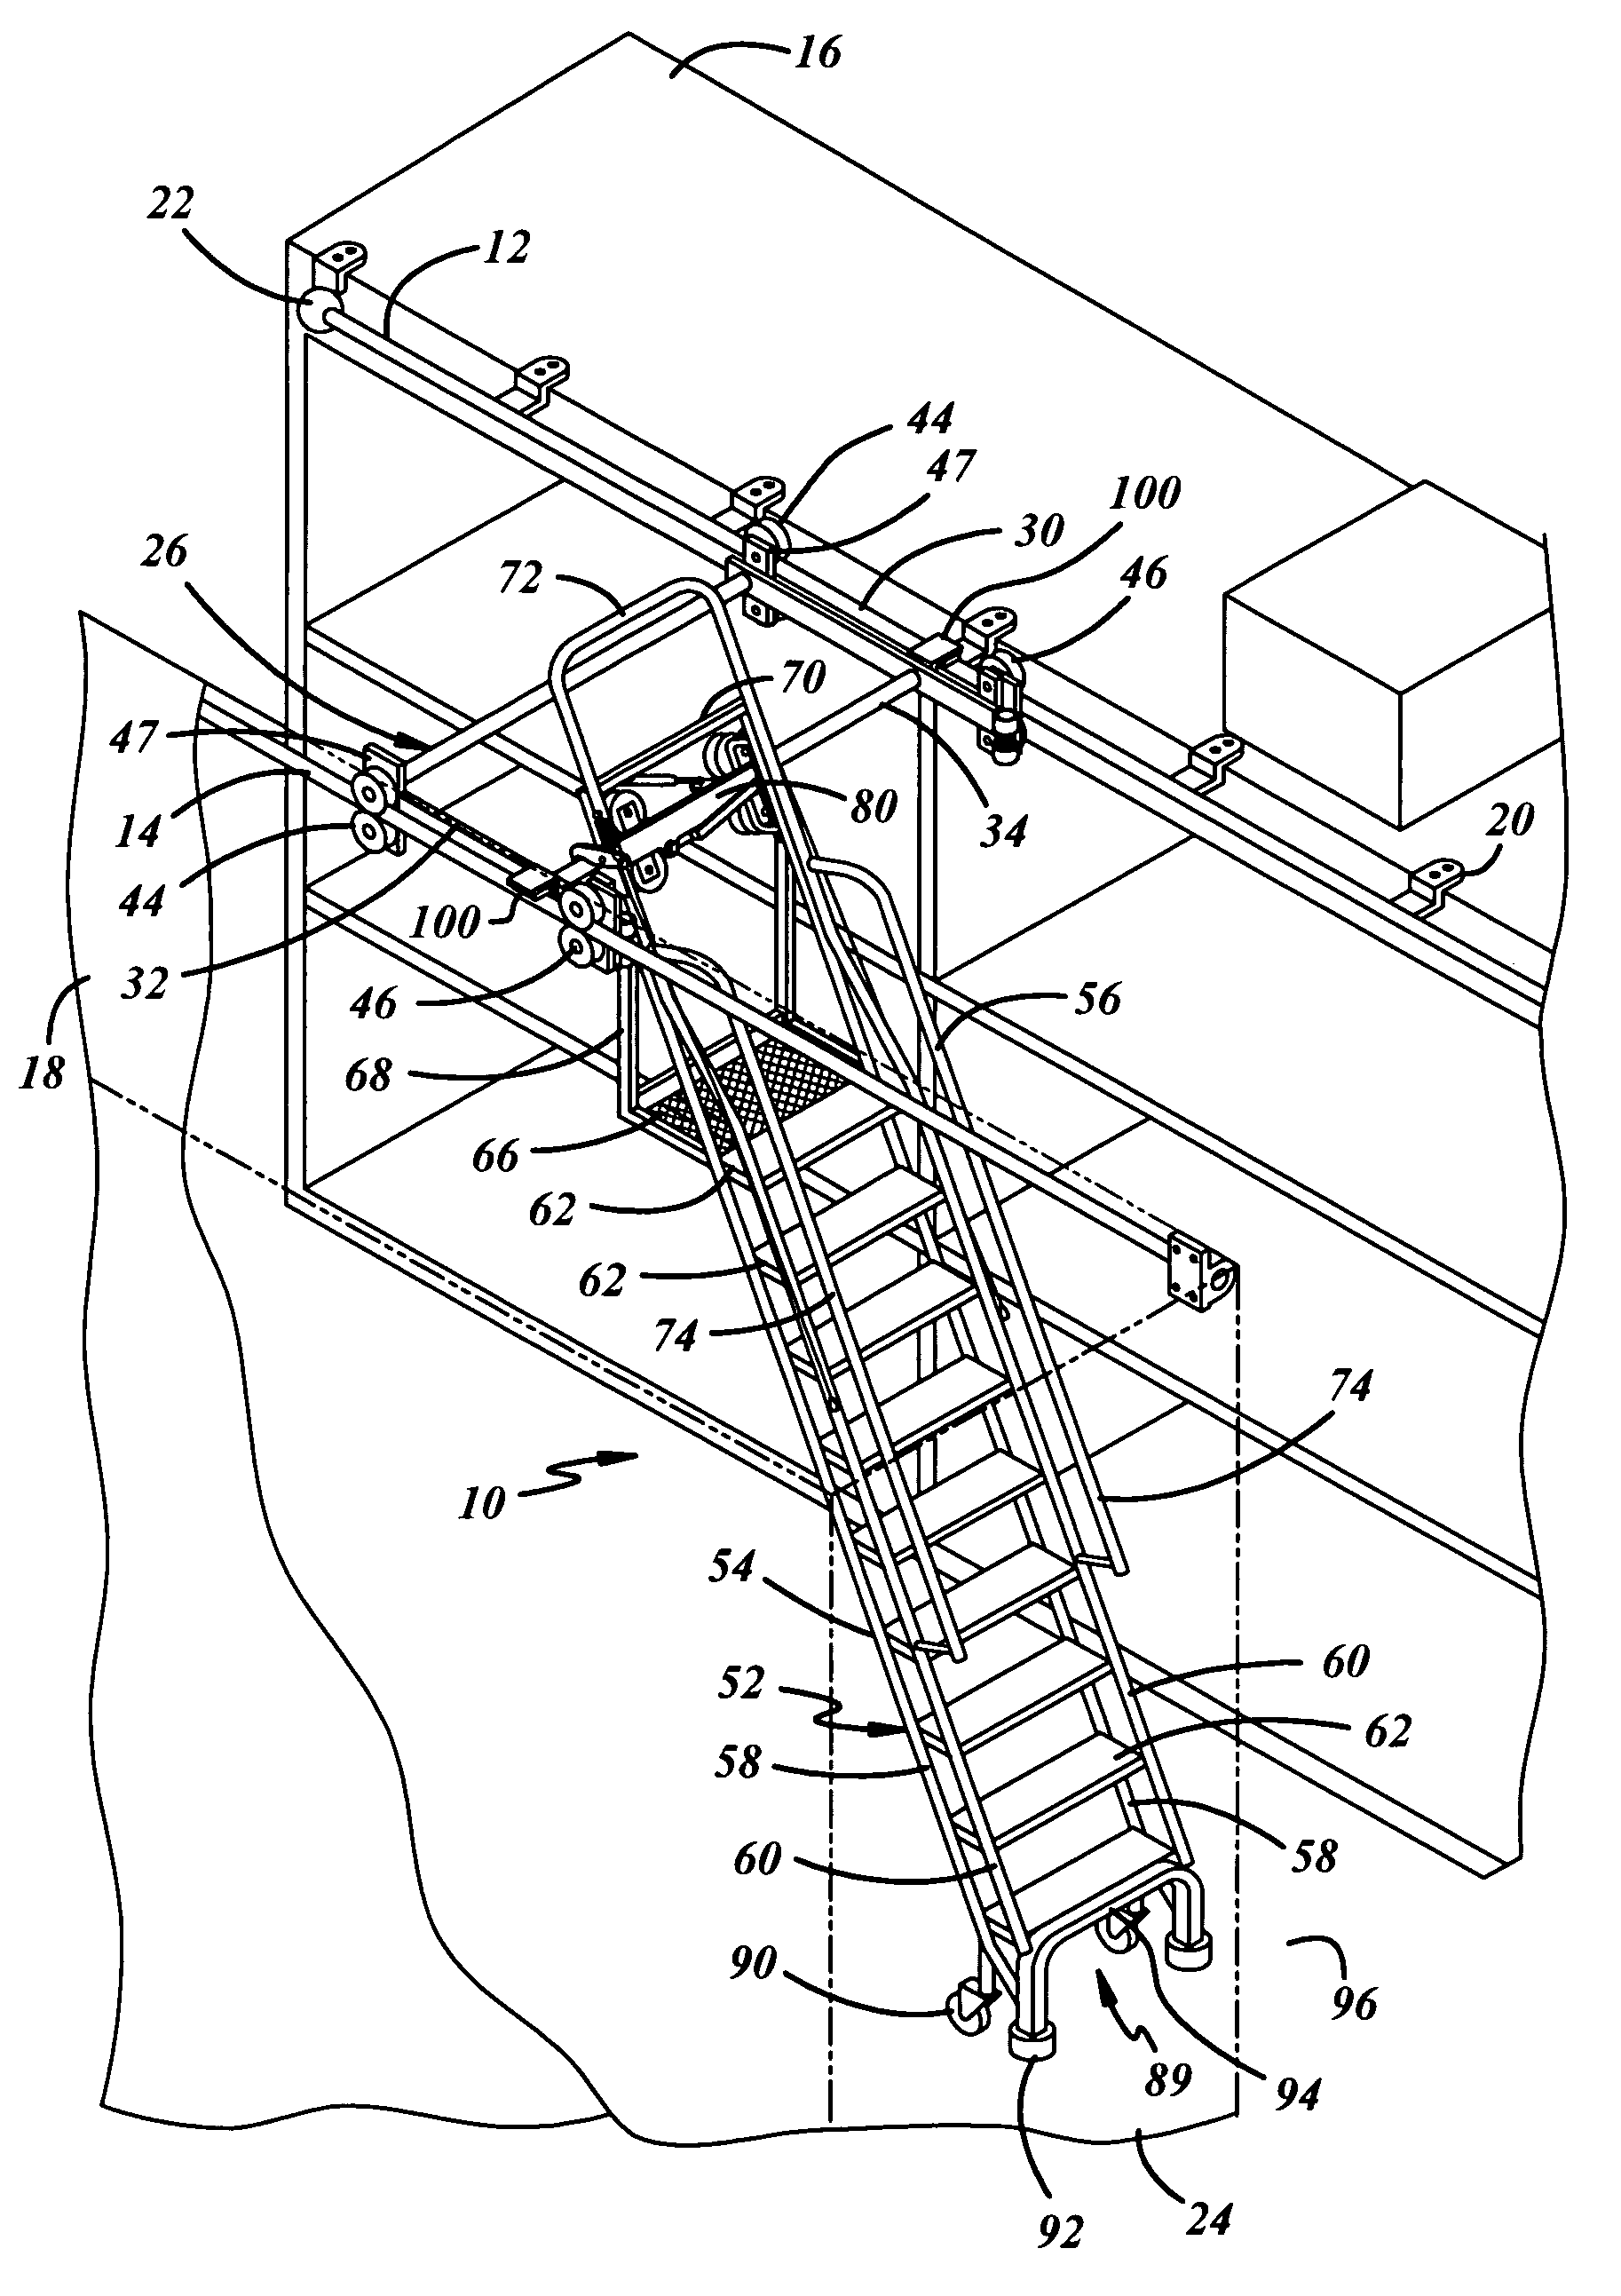 Dual track ladder with brake mechanism that is automatically applied to the upper tracks to hold the ladder in place during use